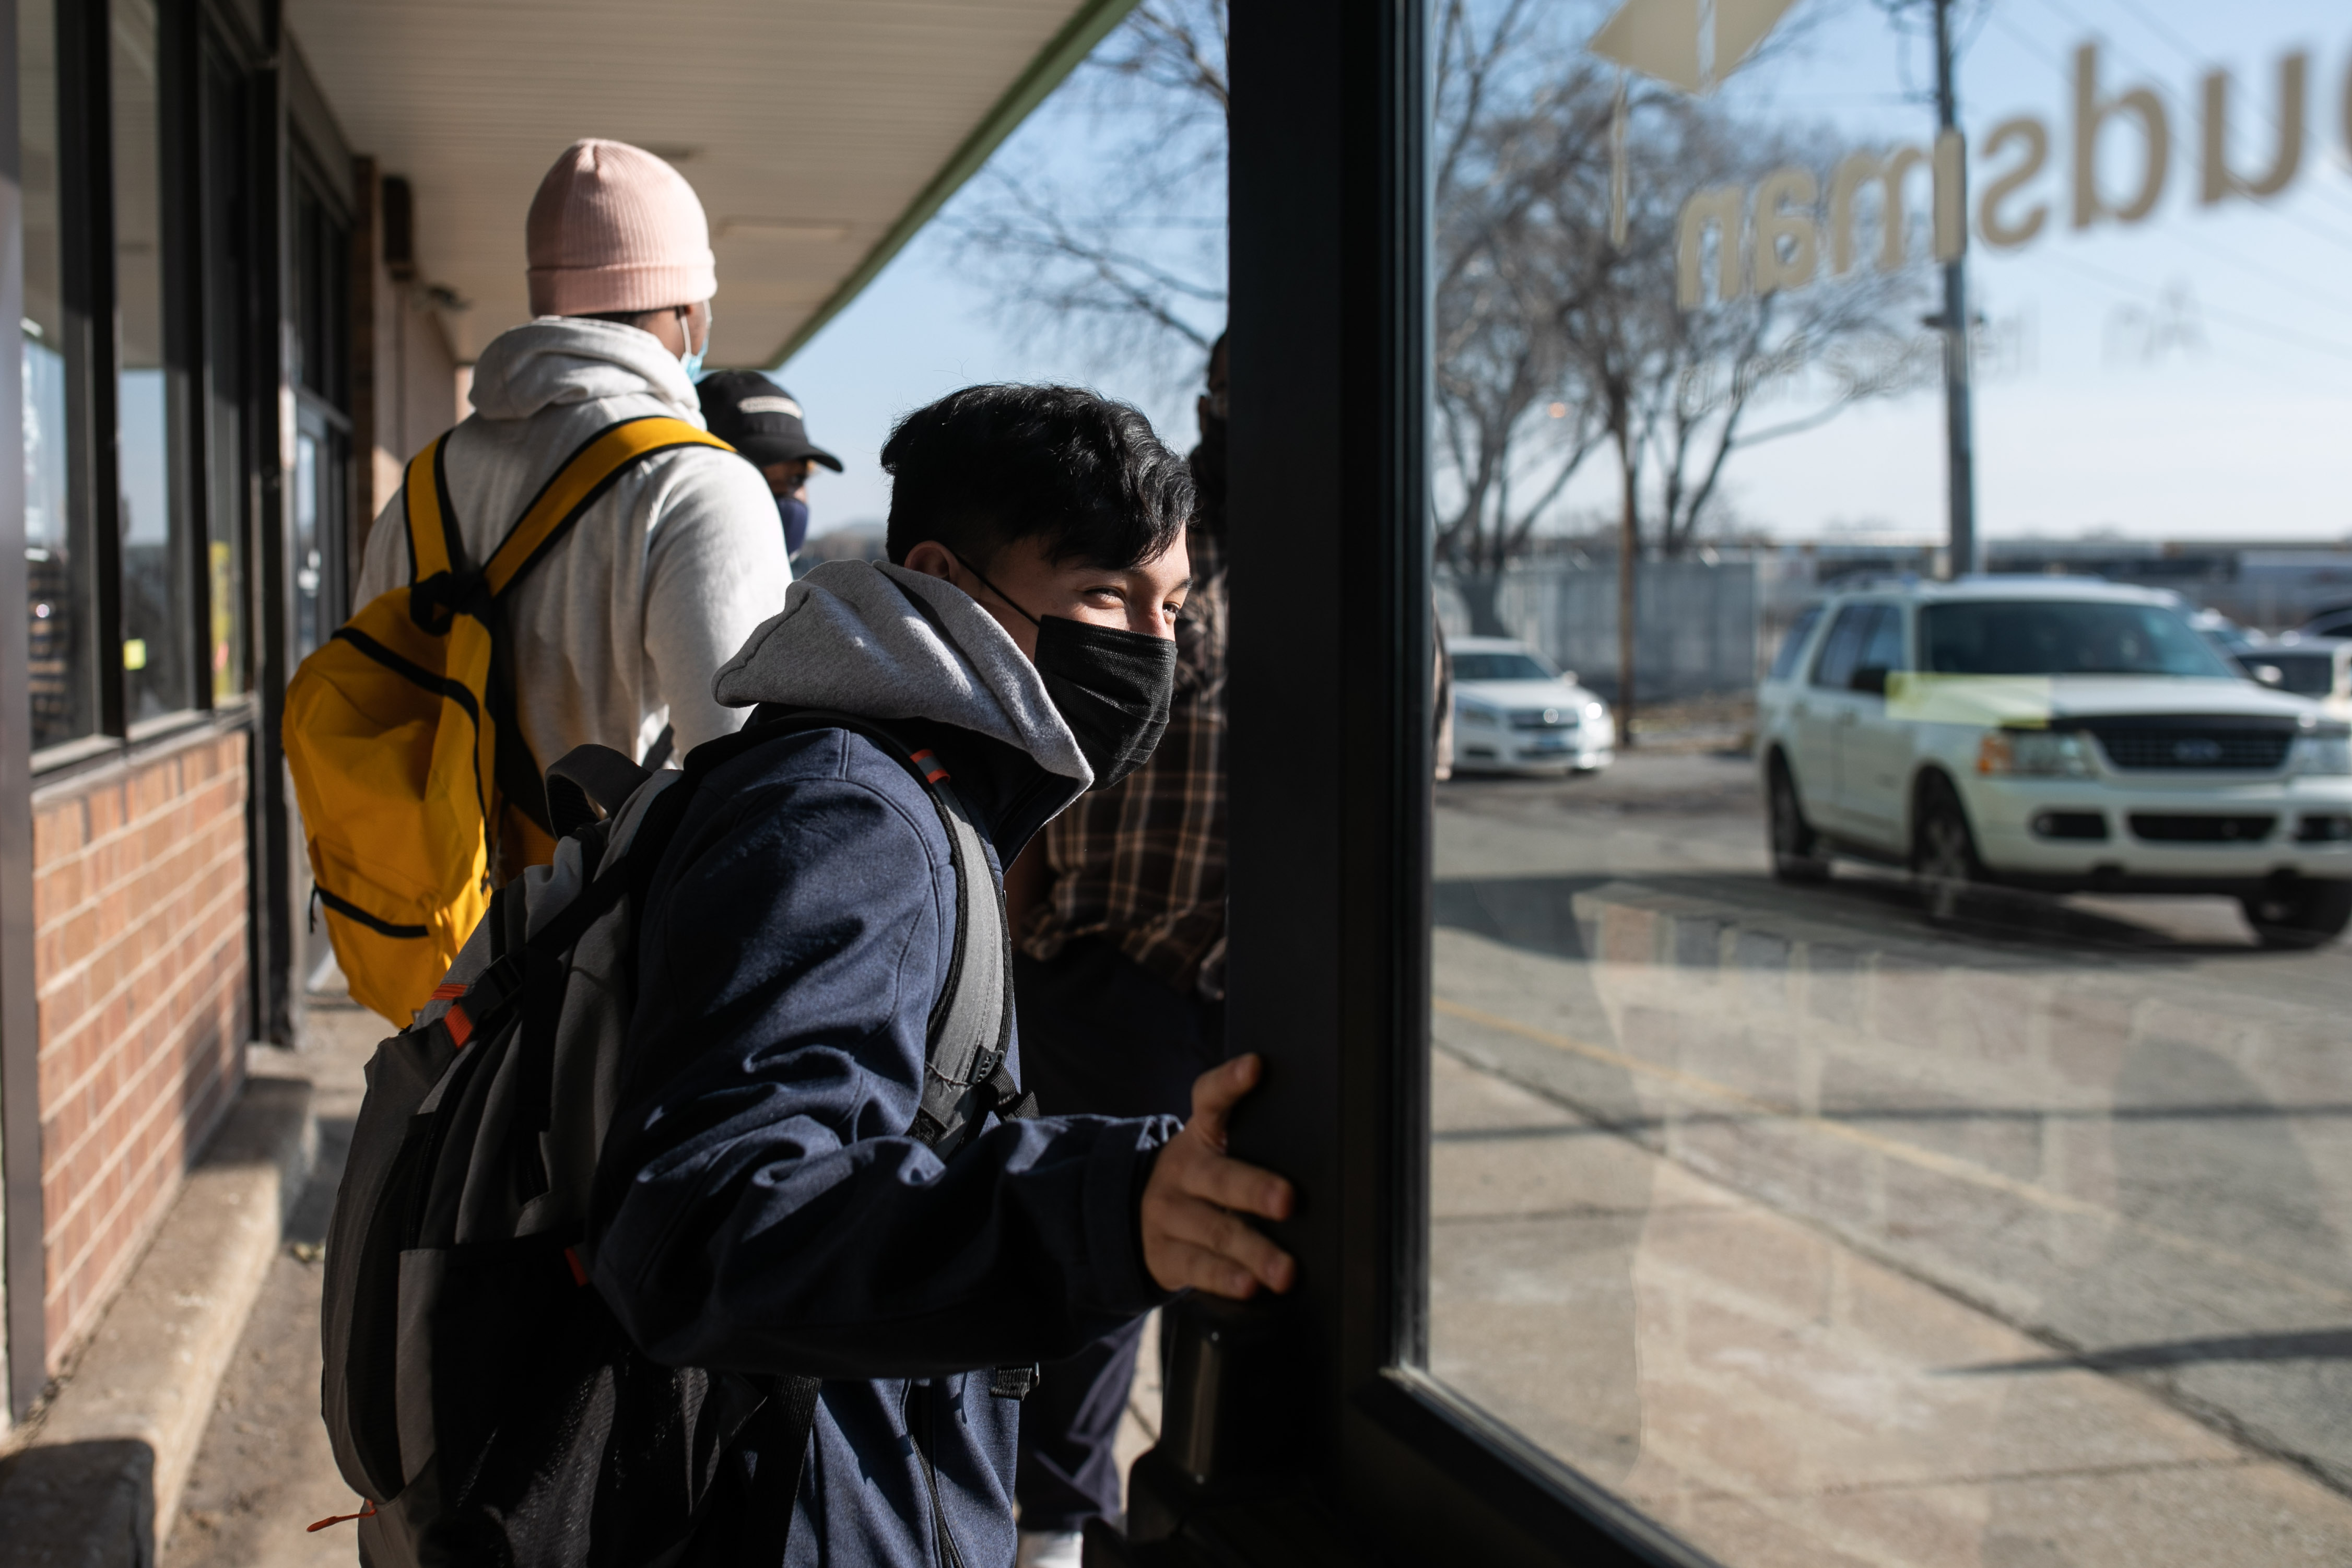 A student, wearing a black mask, blue jacket, and grey hoodie, holds a door open as he exits school. Other students are on the sidewalk directly behind him.